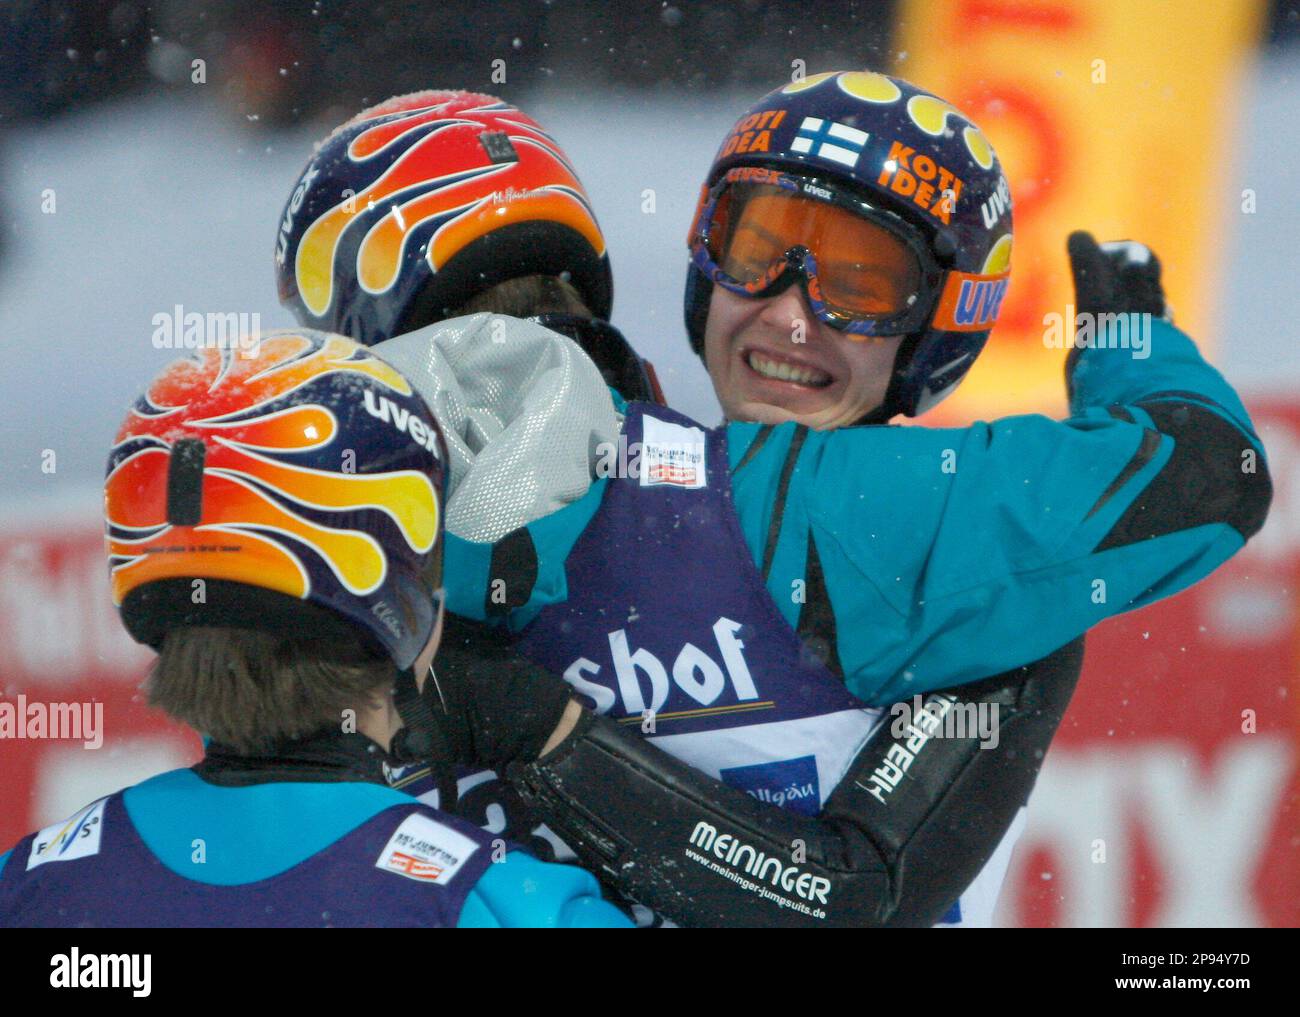 Finland's Harri Olli, right, celebrates with his teammates after winning of  the Ski Jumping World Cup in Oberstdorf, southern Germany, on Saturday,  Feb. 14, 2009. (AP Photo/Matthias Schrader Stock Photo - Alamy